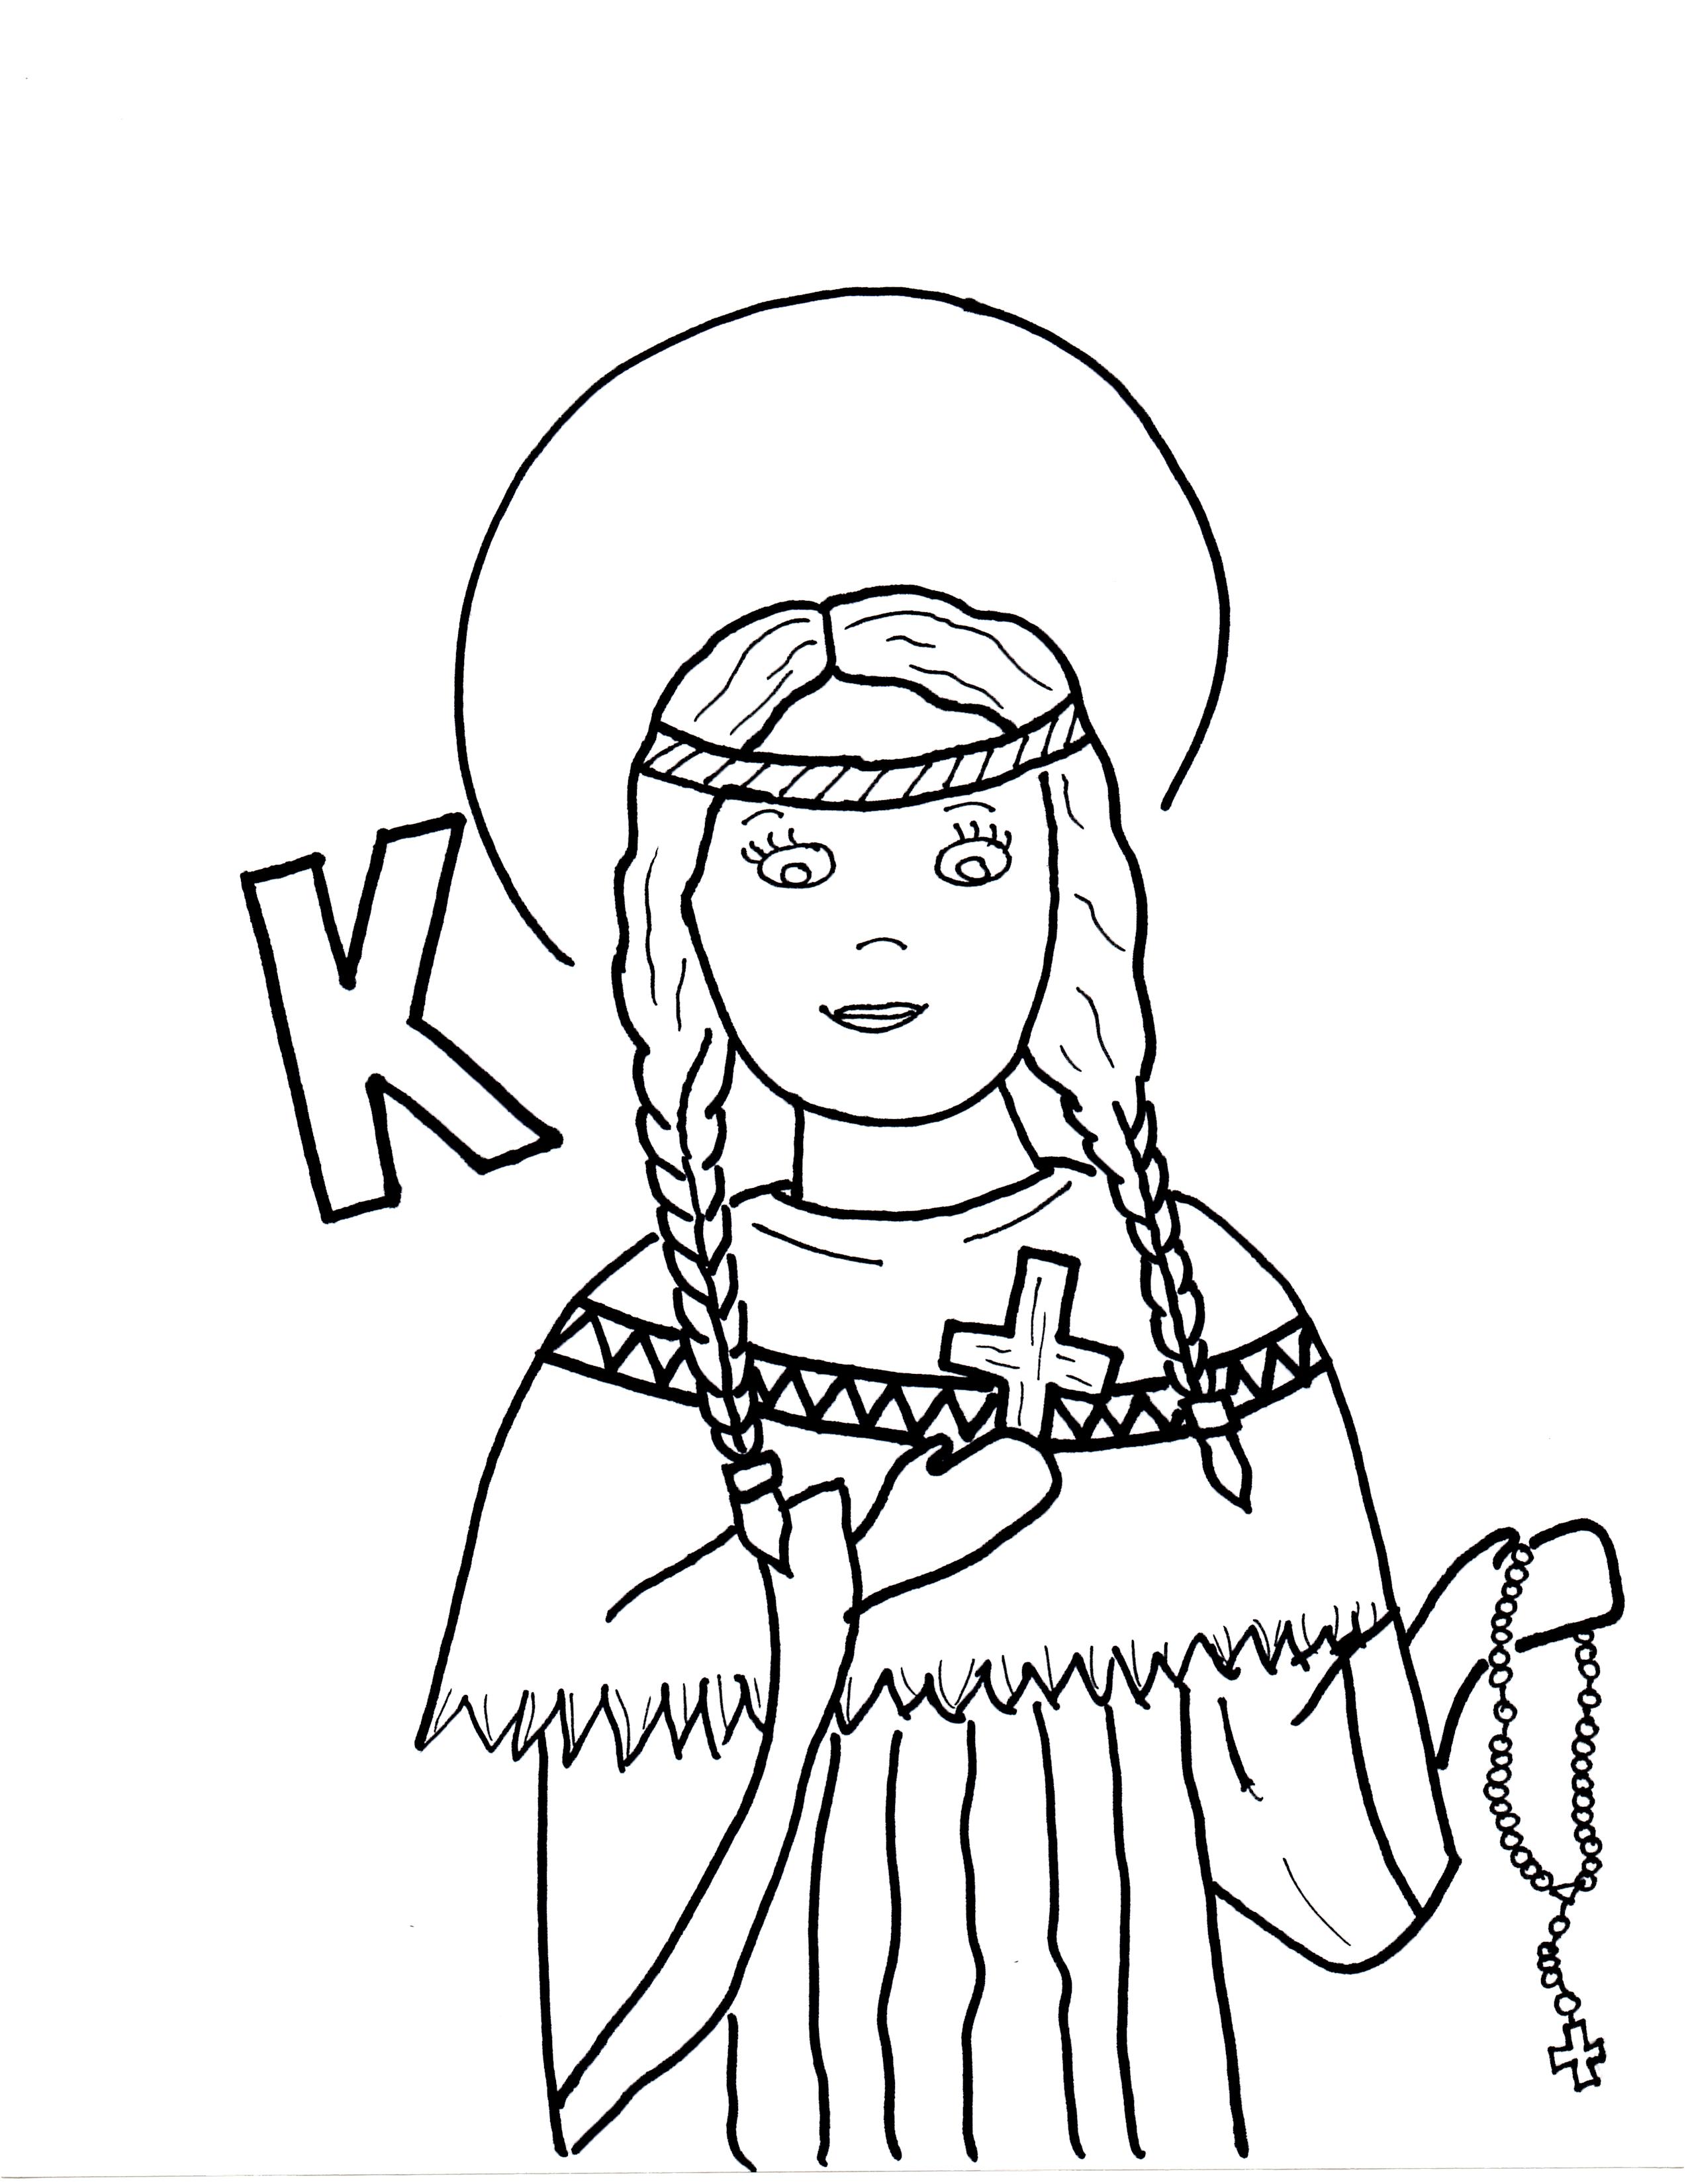 K is for St Kateri Tekakwitha Saints to Color